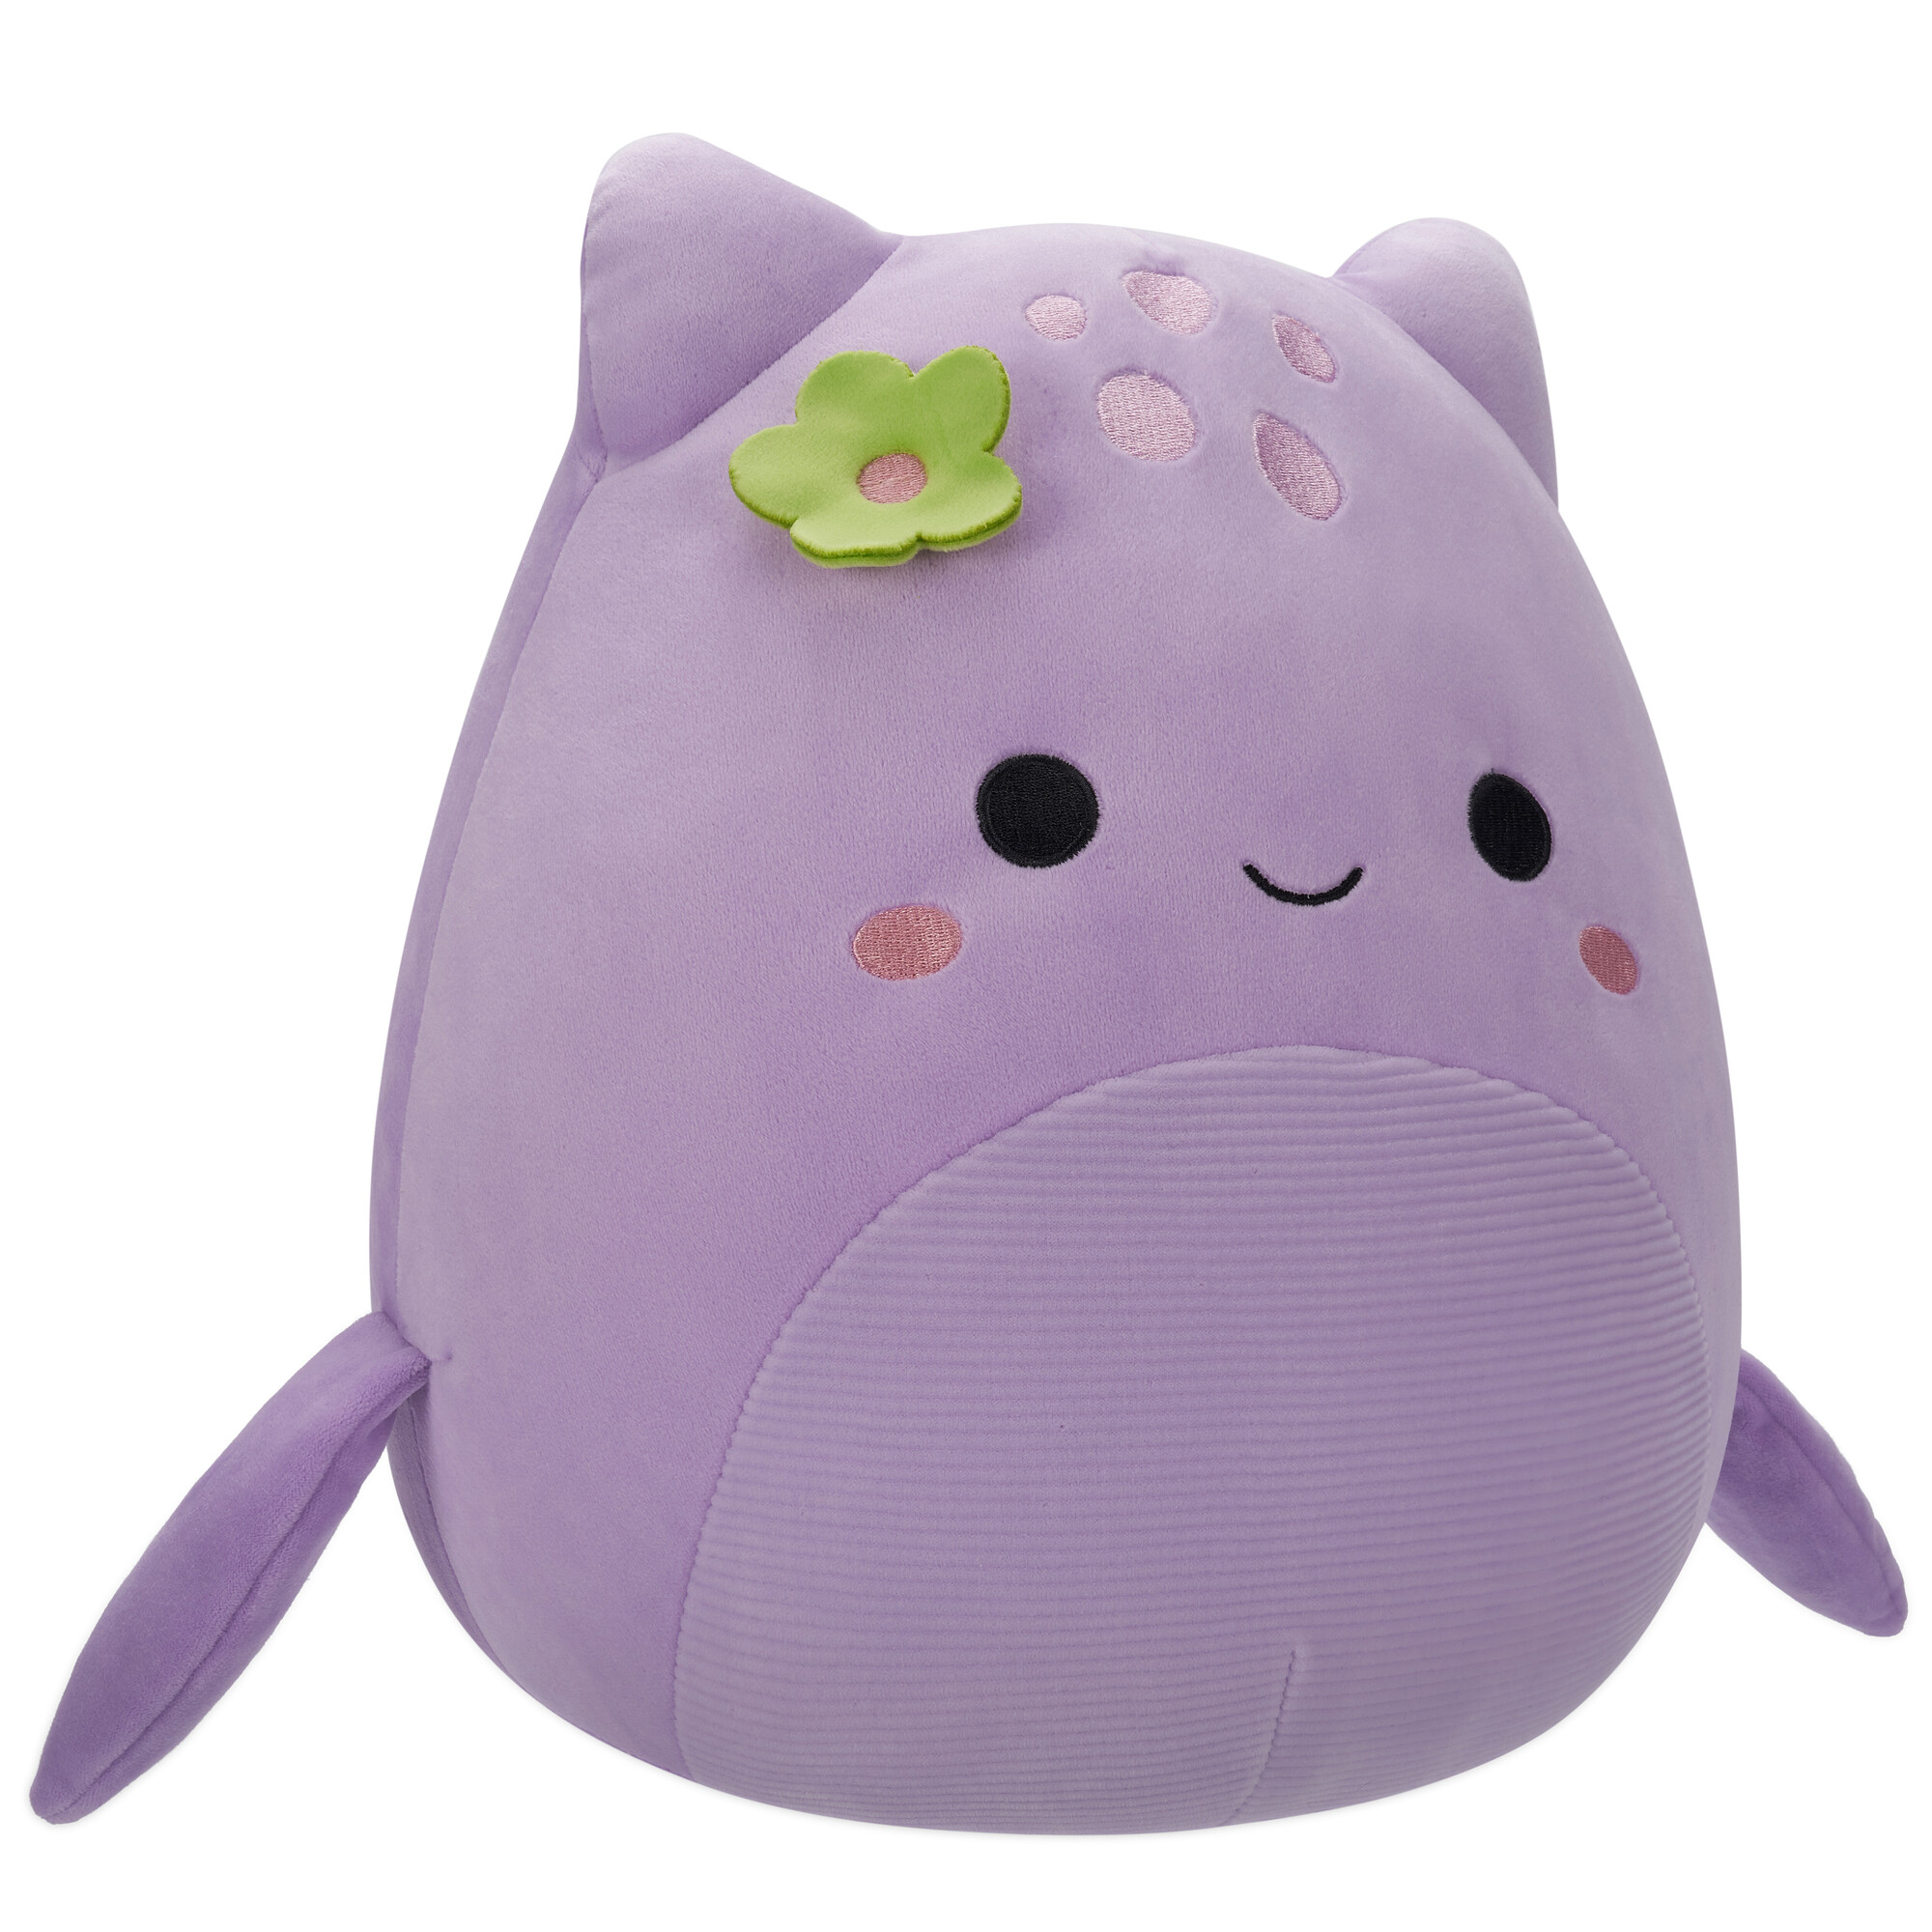 Squishmallows 12-Inch Shon the Loch Ness Monster